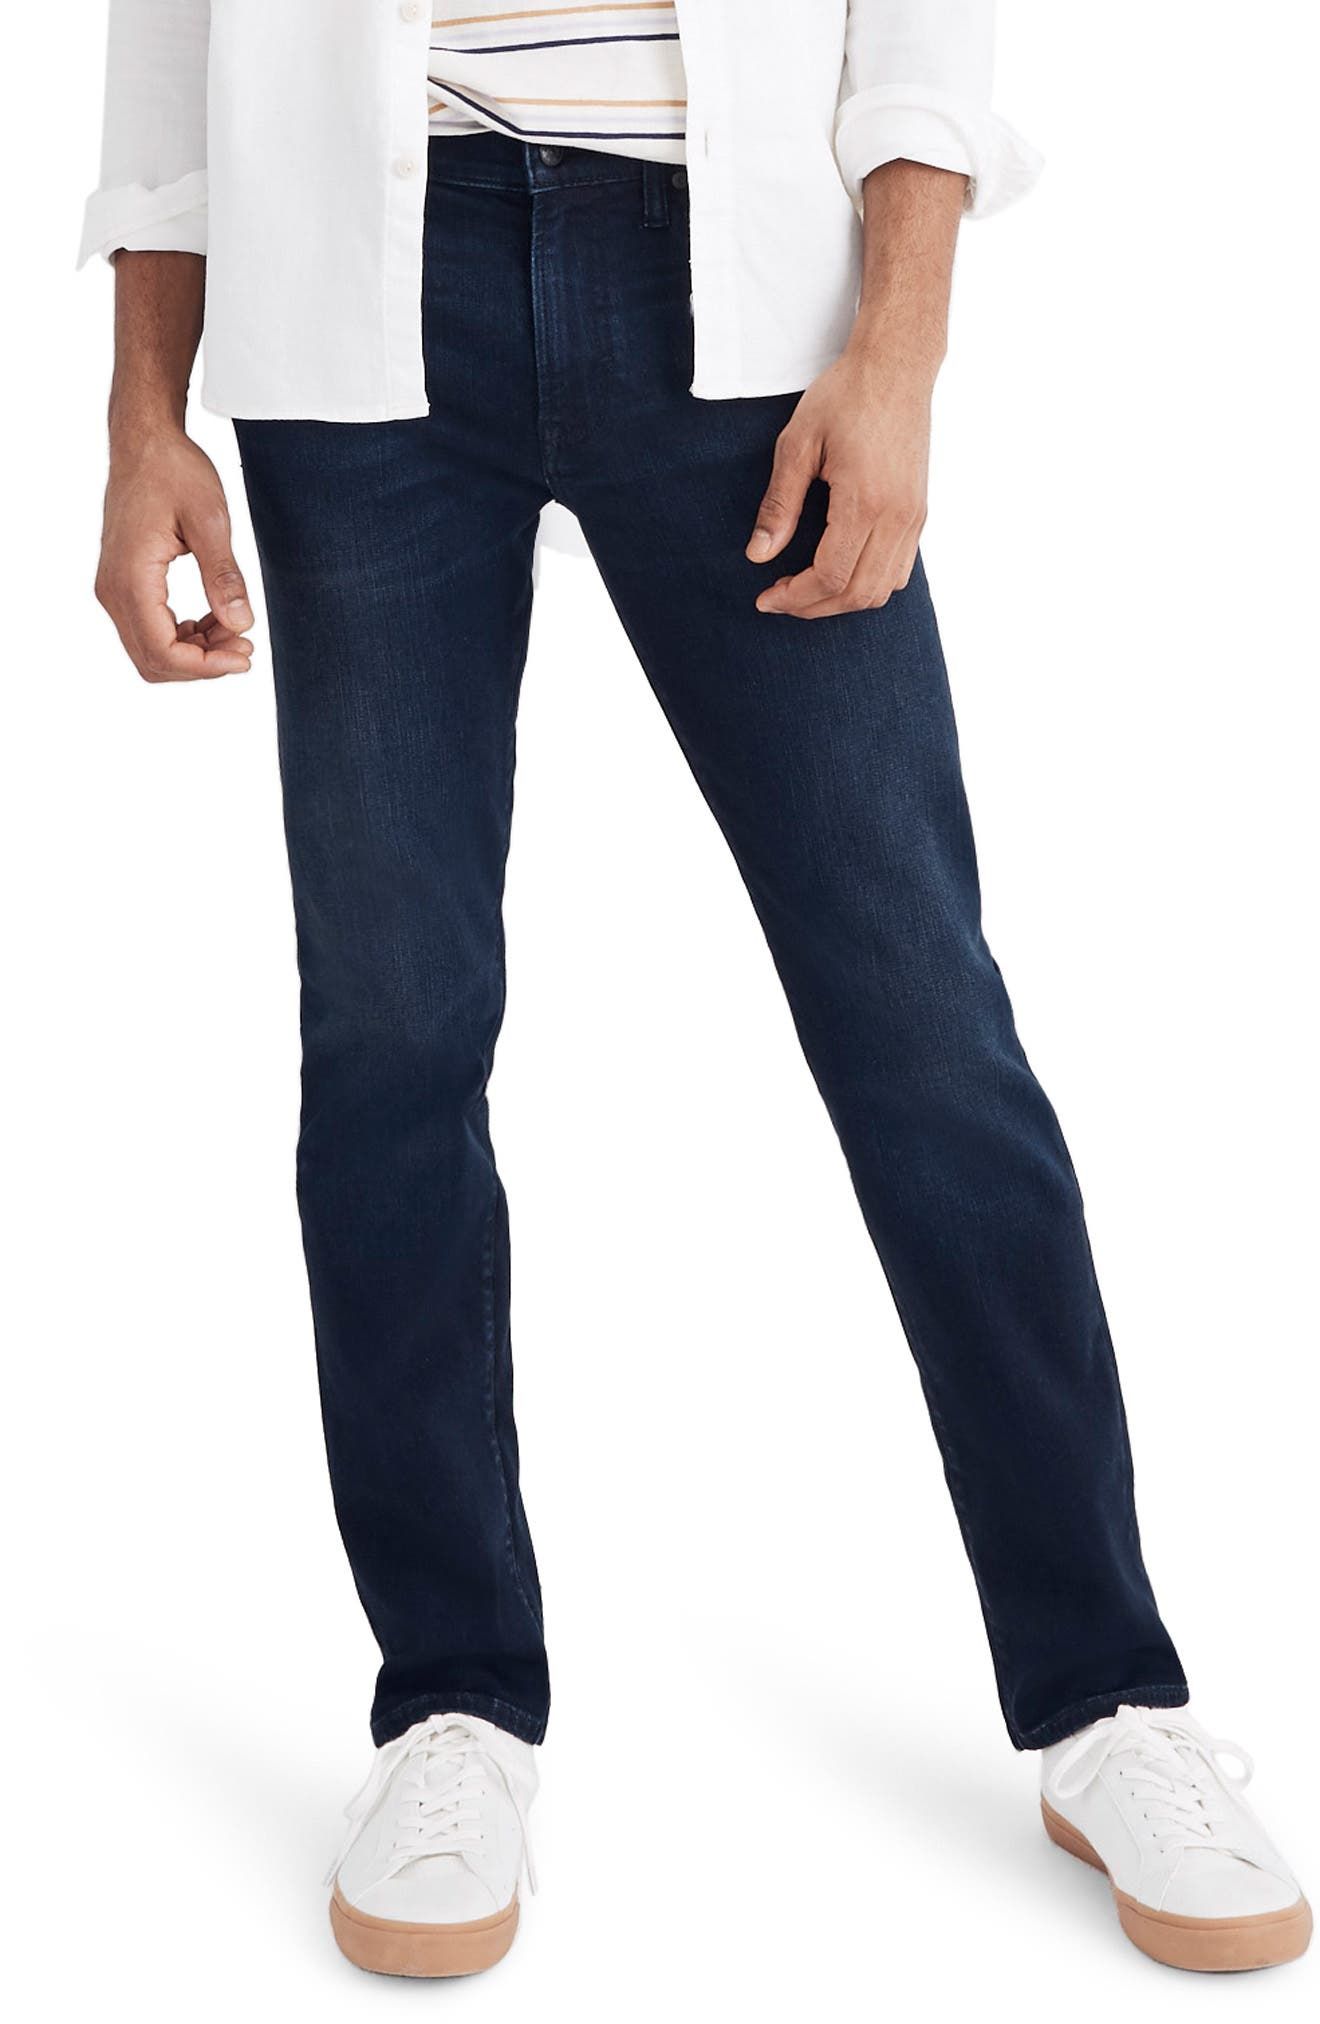 Madewell Slim Fit Jeans 